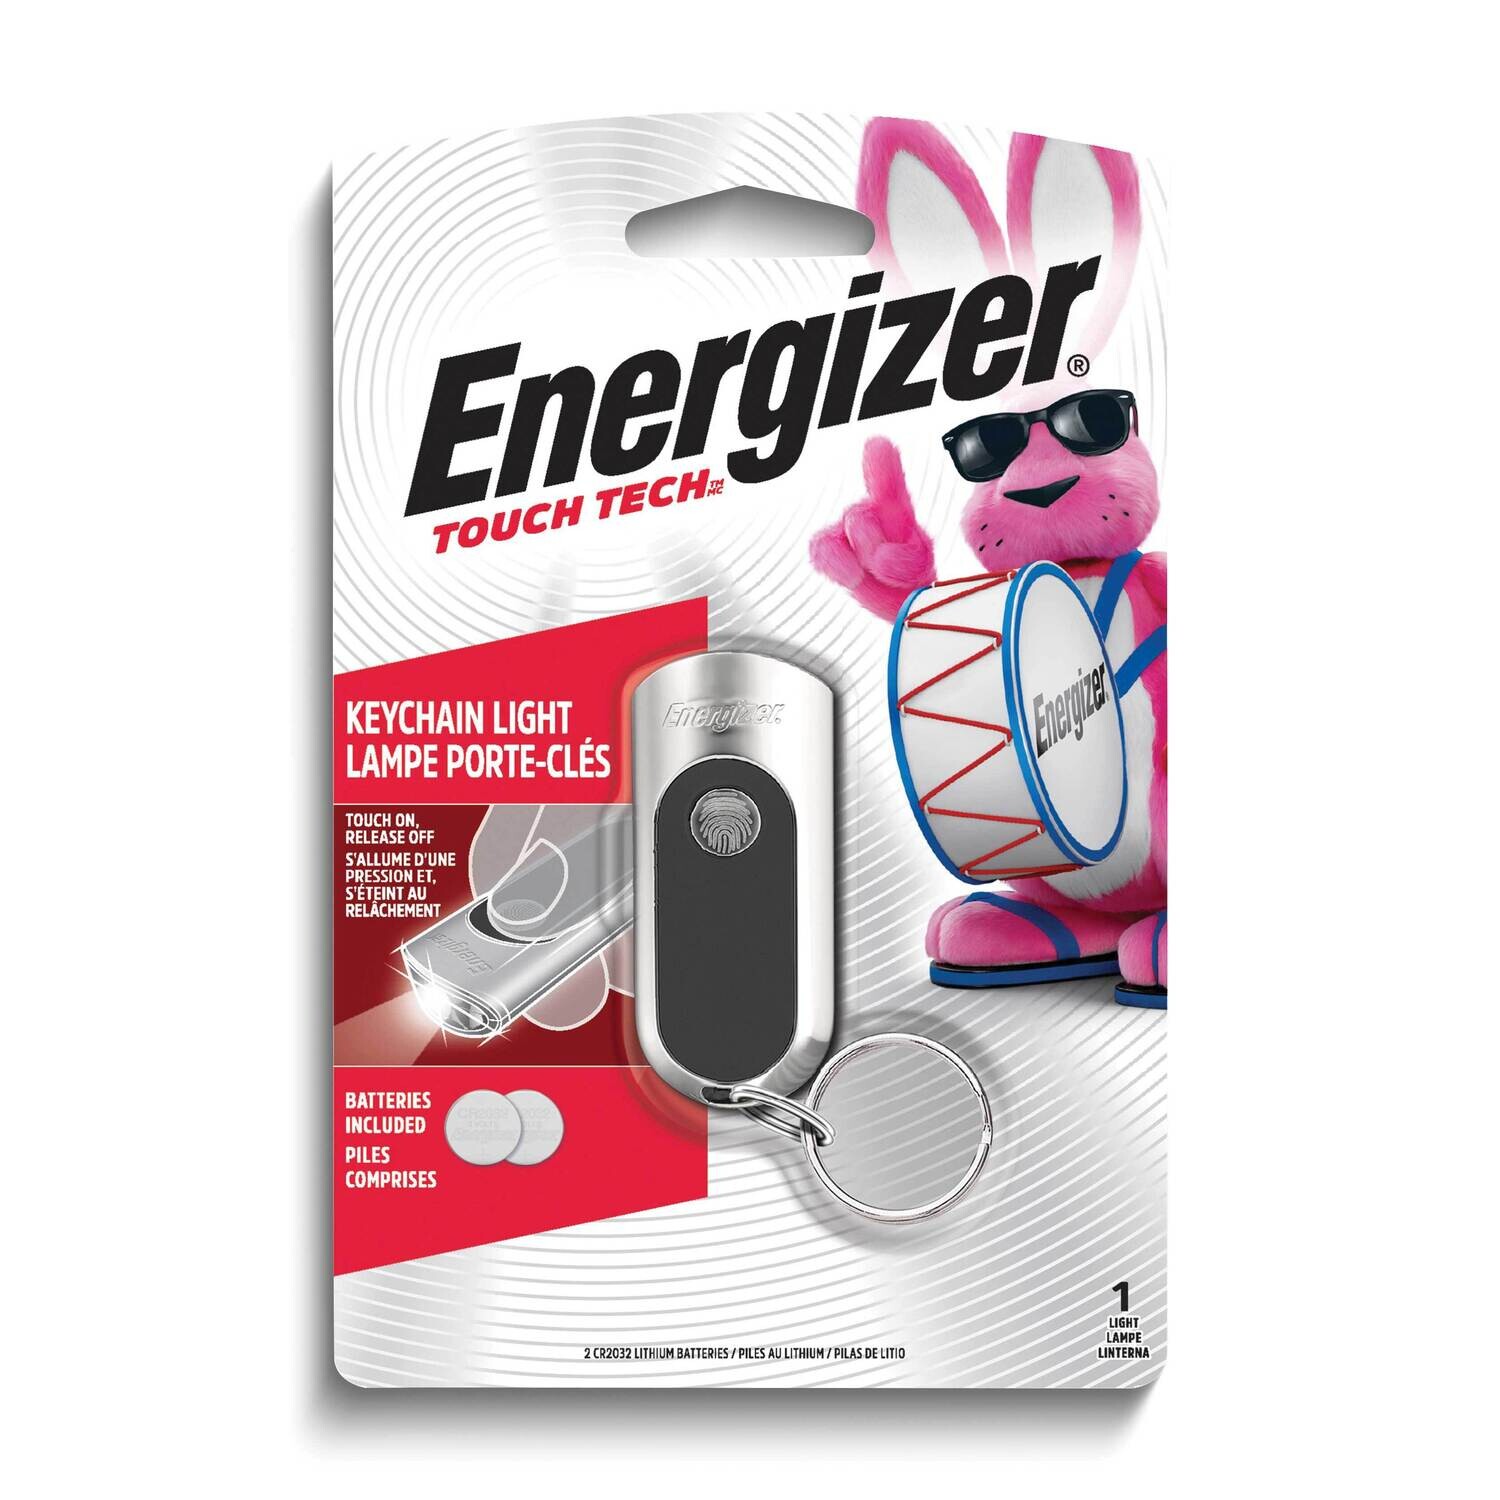 Energizer Keychain Light Touch Tech Technology Two Cr2032 Batteries Included JT5343